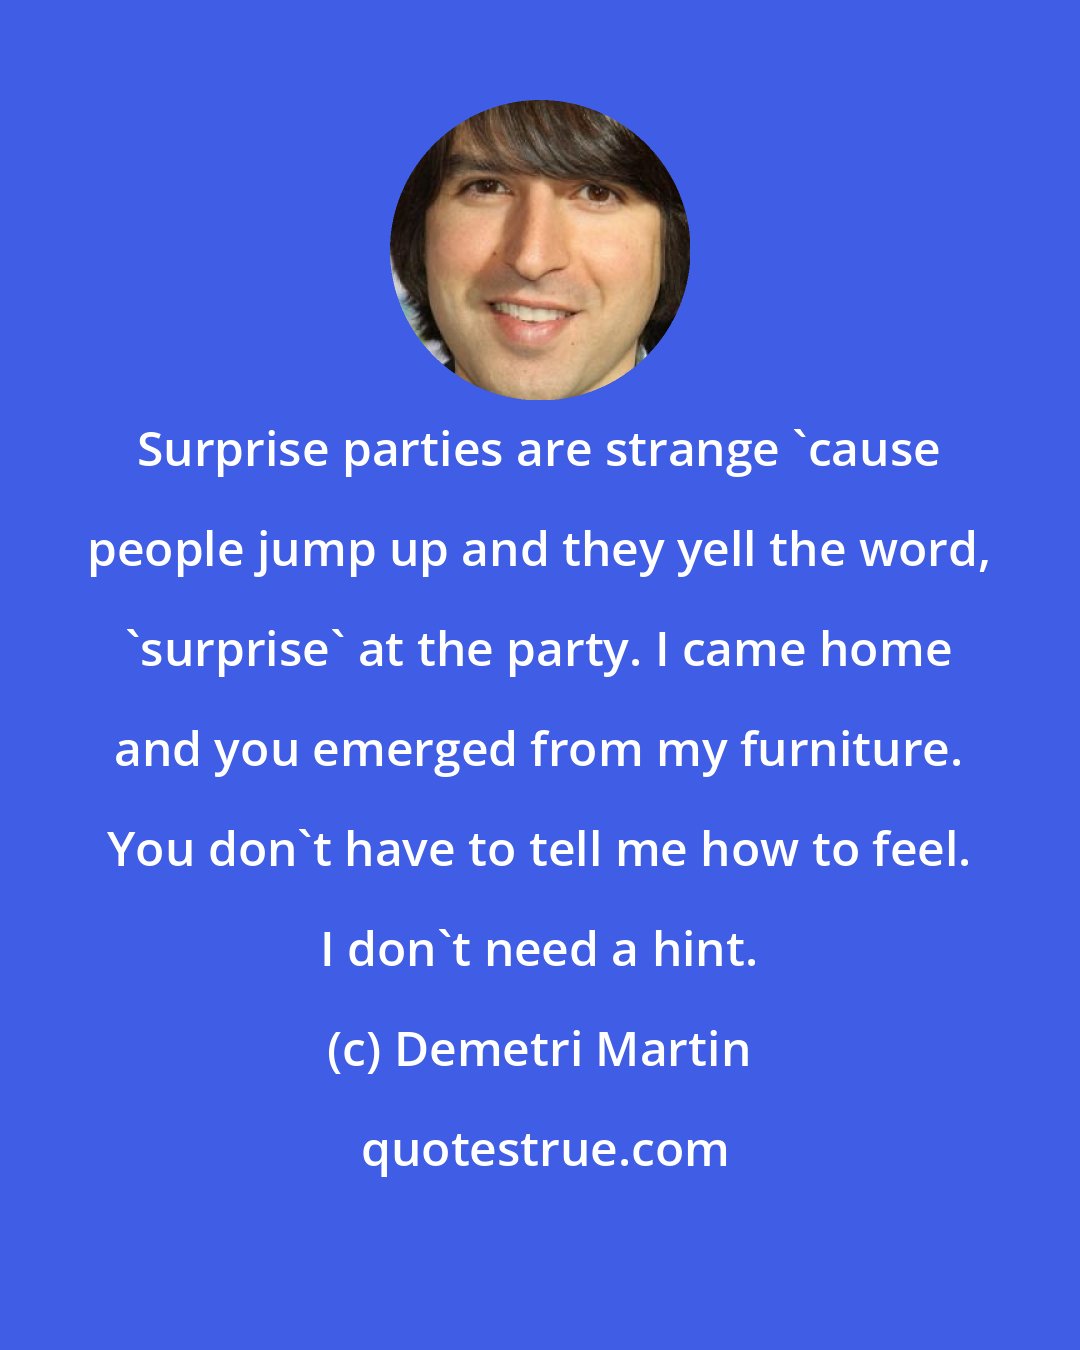 Demetri Martin: Surprise parties are strange 'cause people jump up and they yell the word, 'surprise' at the party. I came home and you emerged from my furniture. You don't have to tell me how to feel. I don't need a hint.